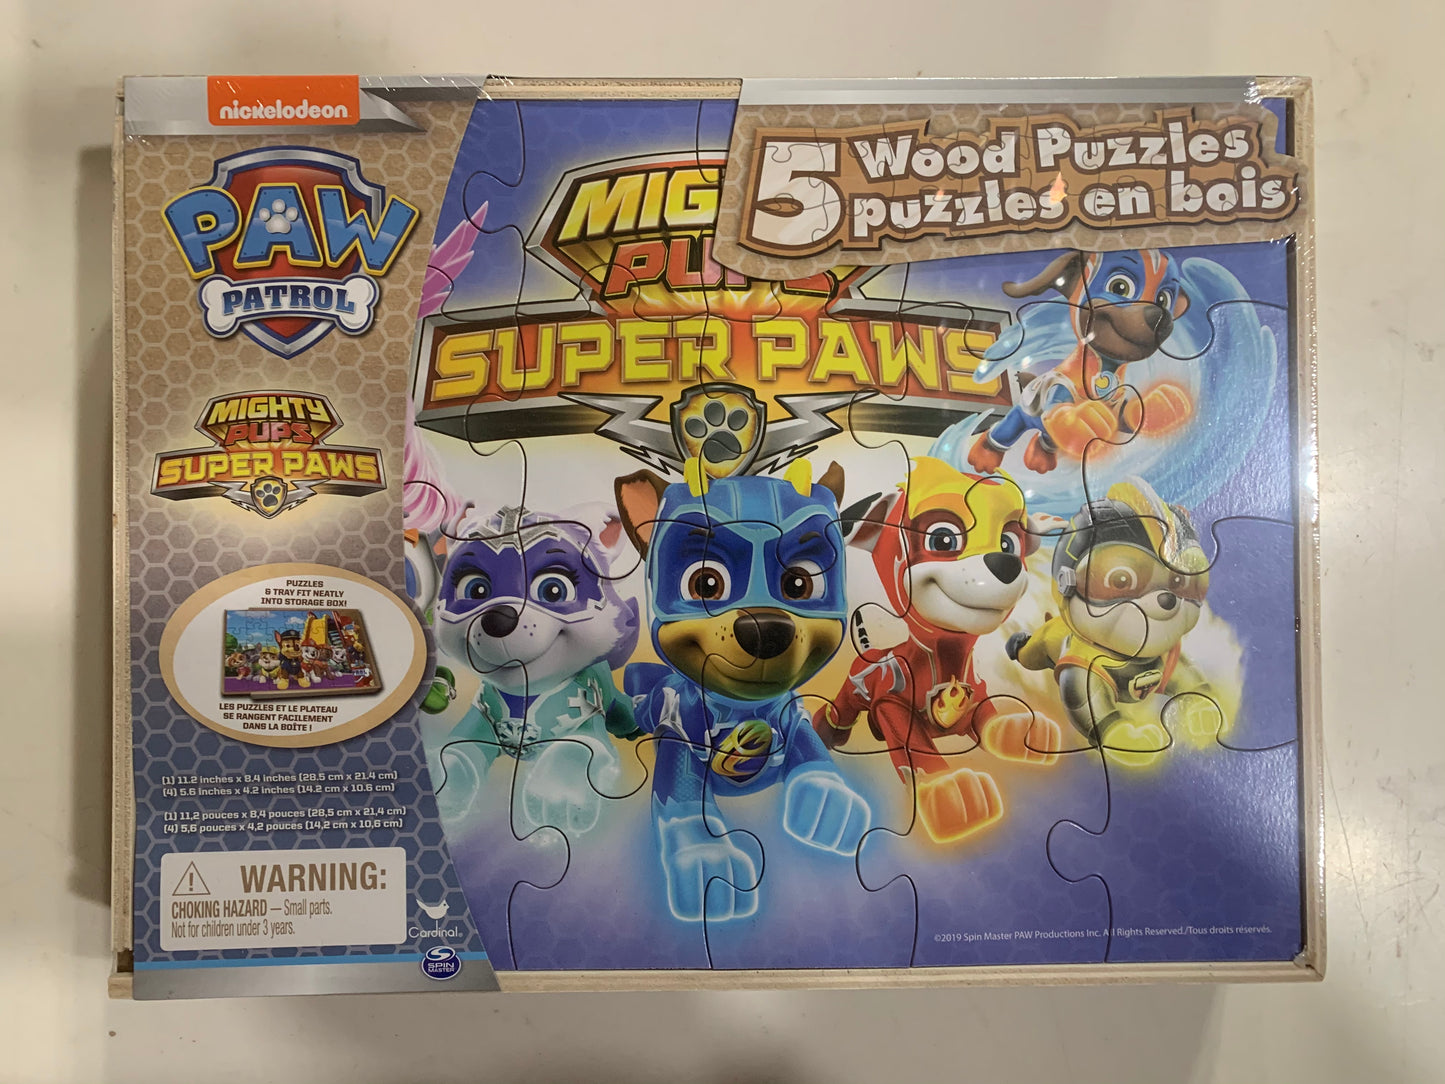 Paw Patrol Mighty Pups Super Paws 5-Pack Wooden Jigsaw Puzzle Set With Storage Box